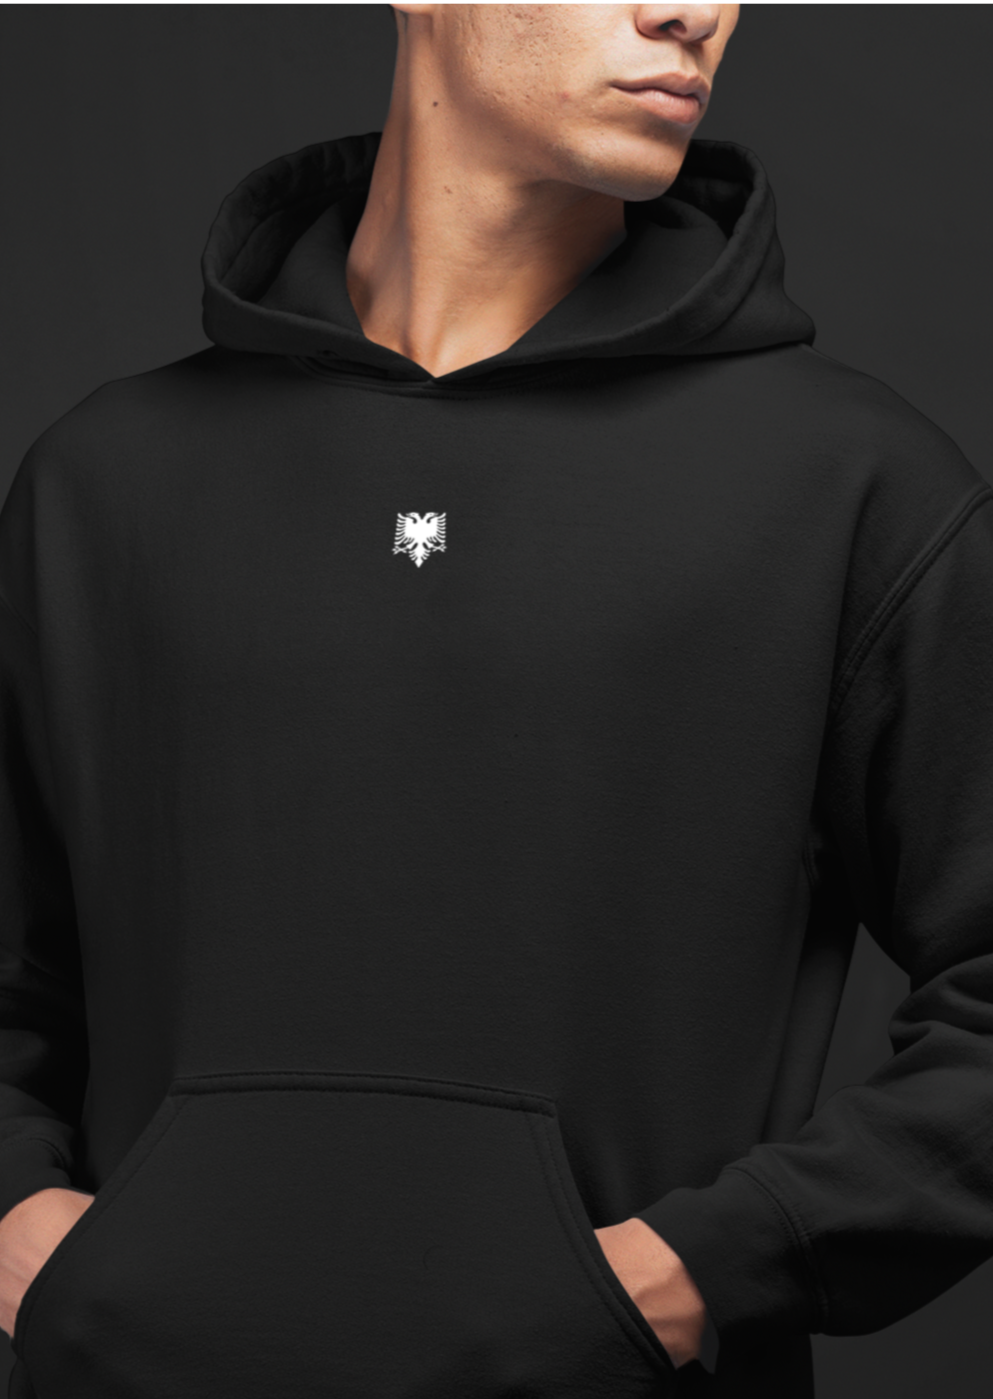 BLACK HOODIE WITH SMALL WHITE FLAG EAGLE - GRAFFITI ON THE BACK